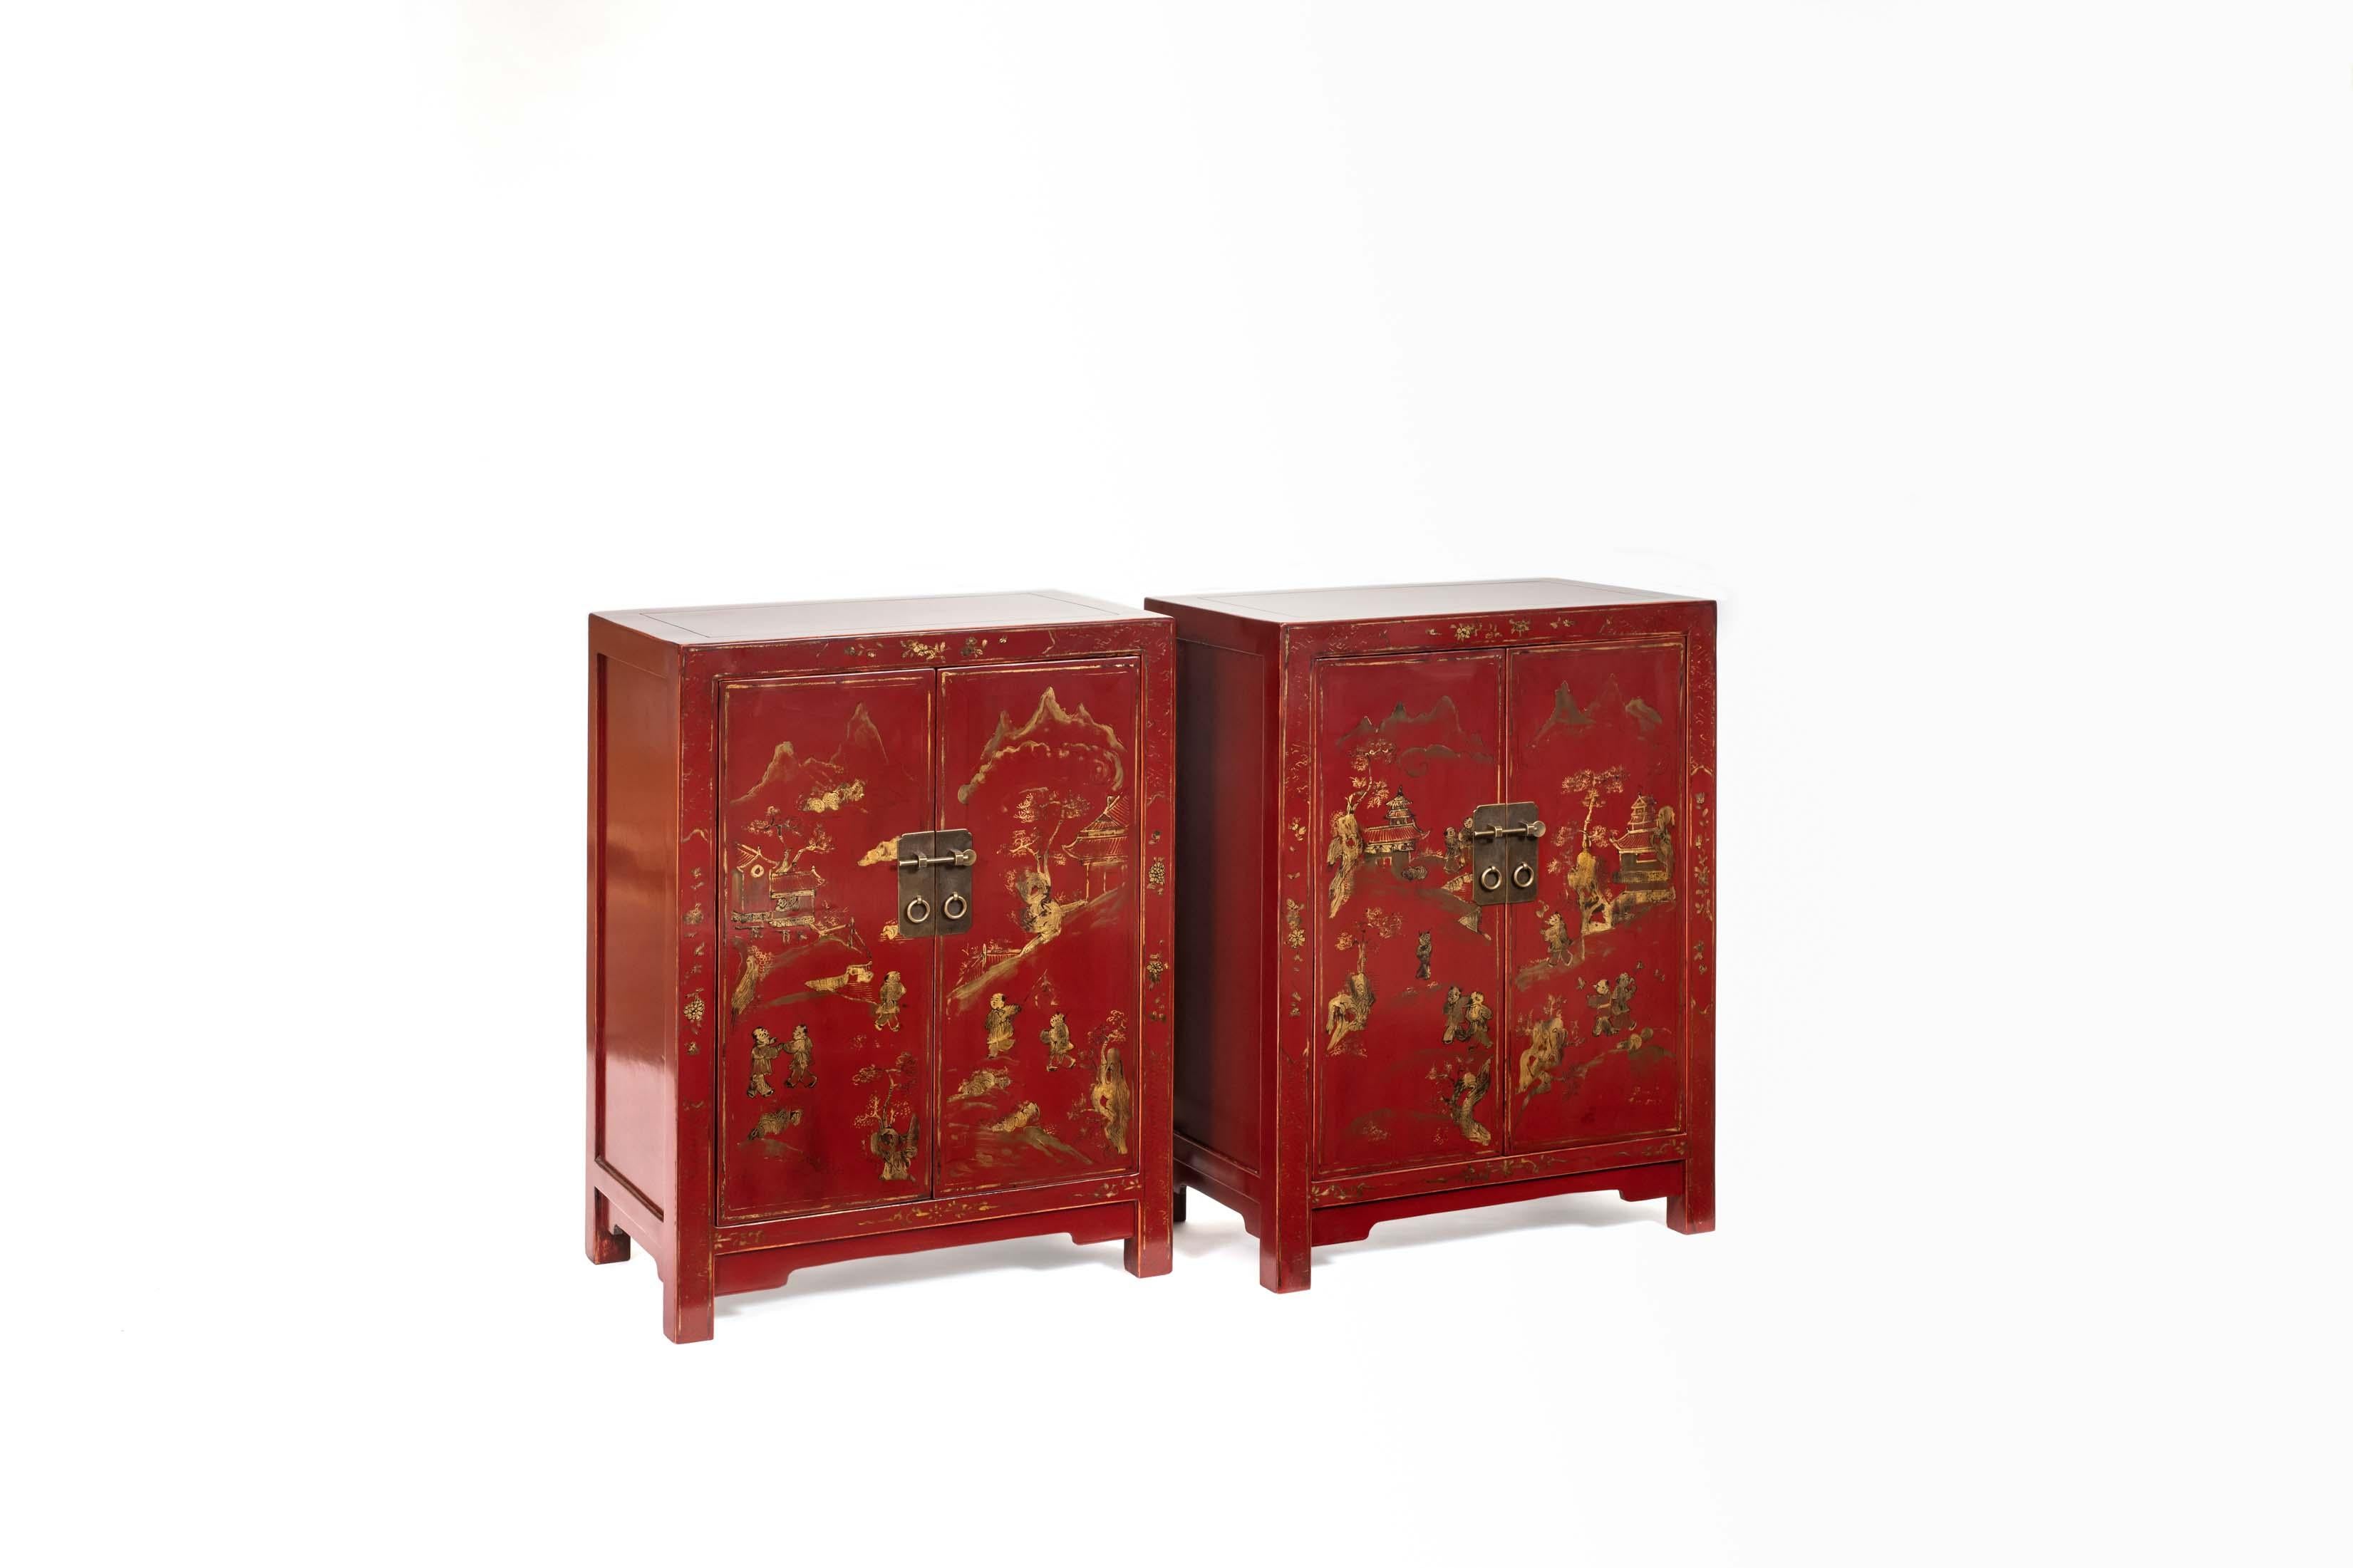 Chinese Pair of Small Red Lacquer Cabinets Handpainted with Gilt Children in Courtyard